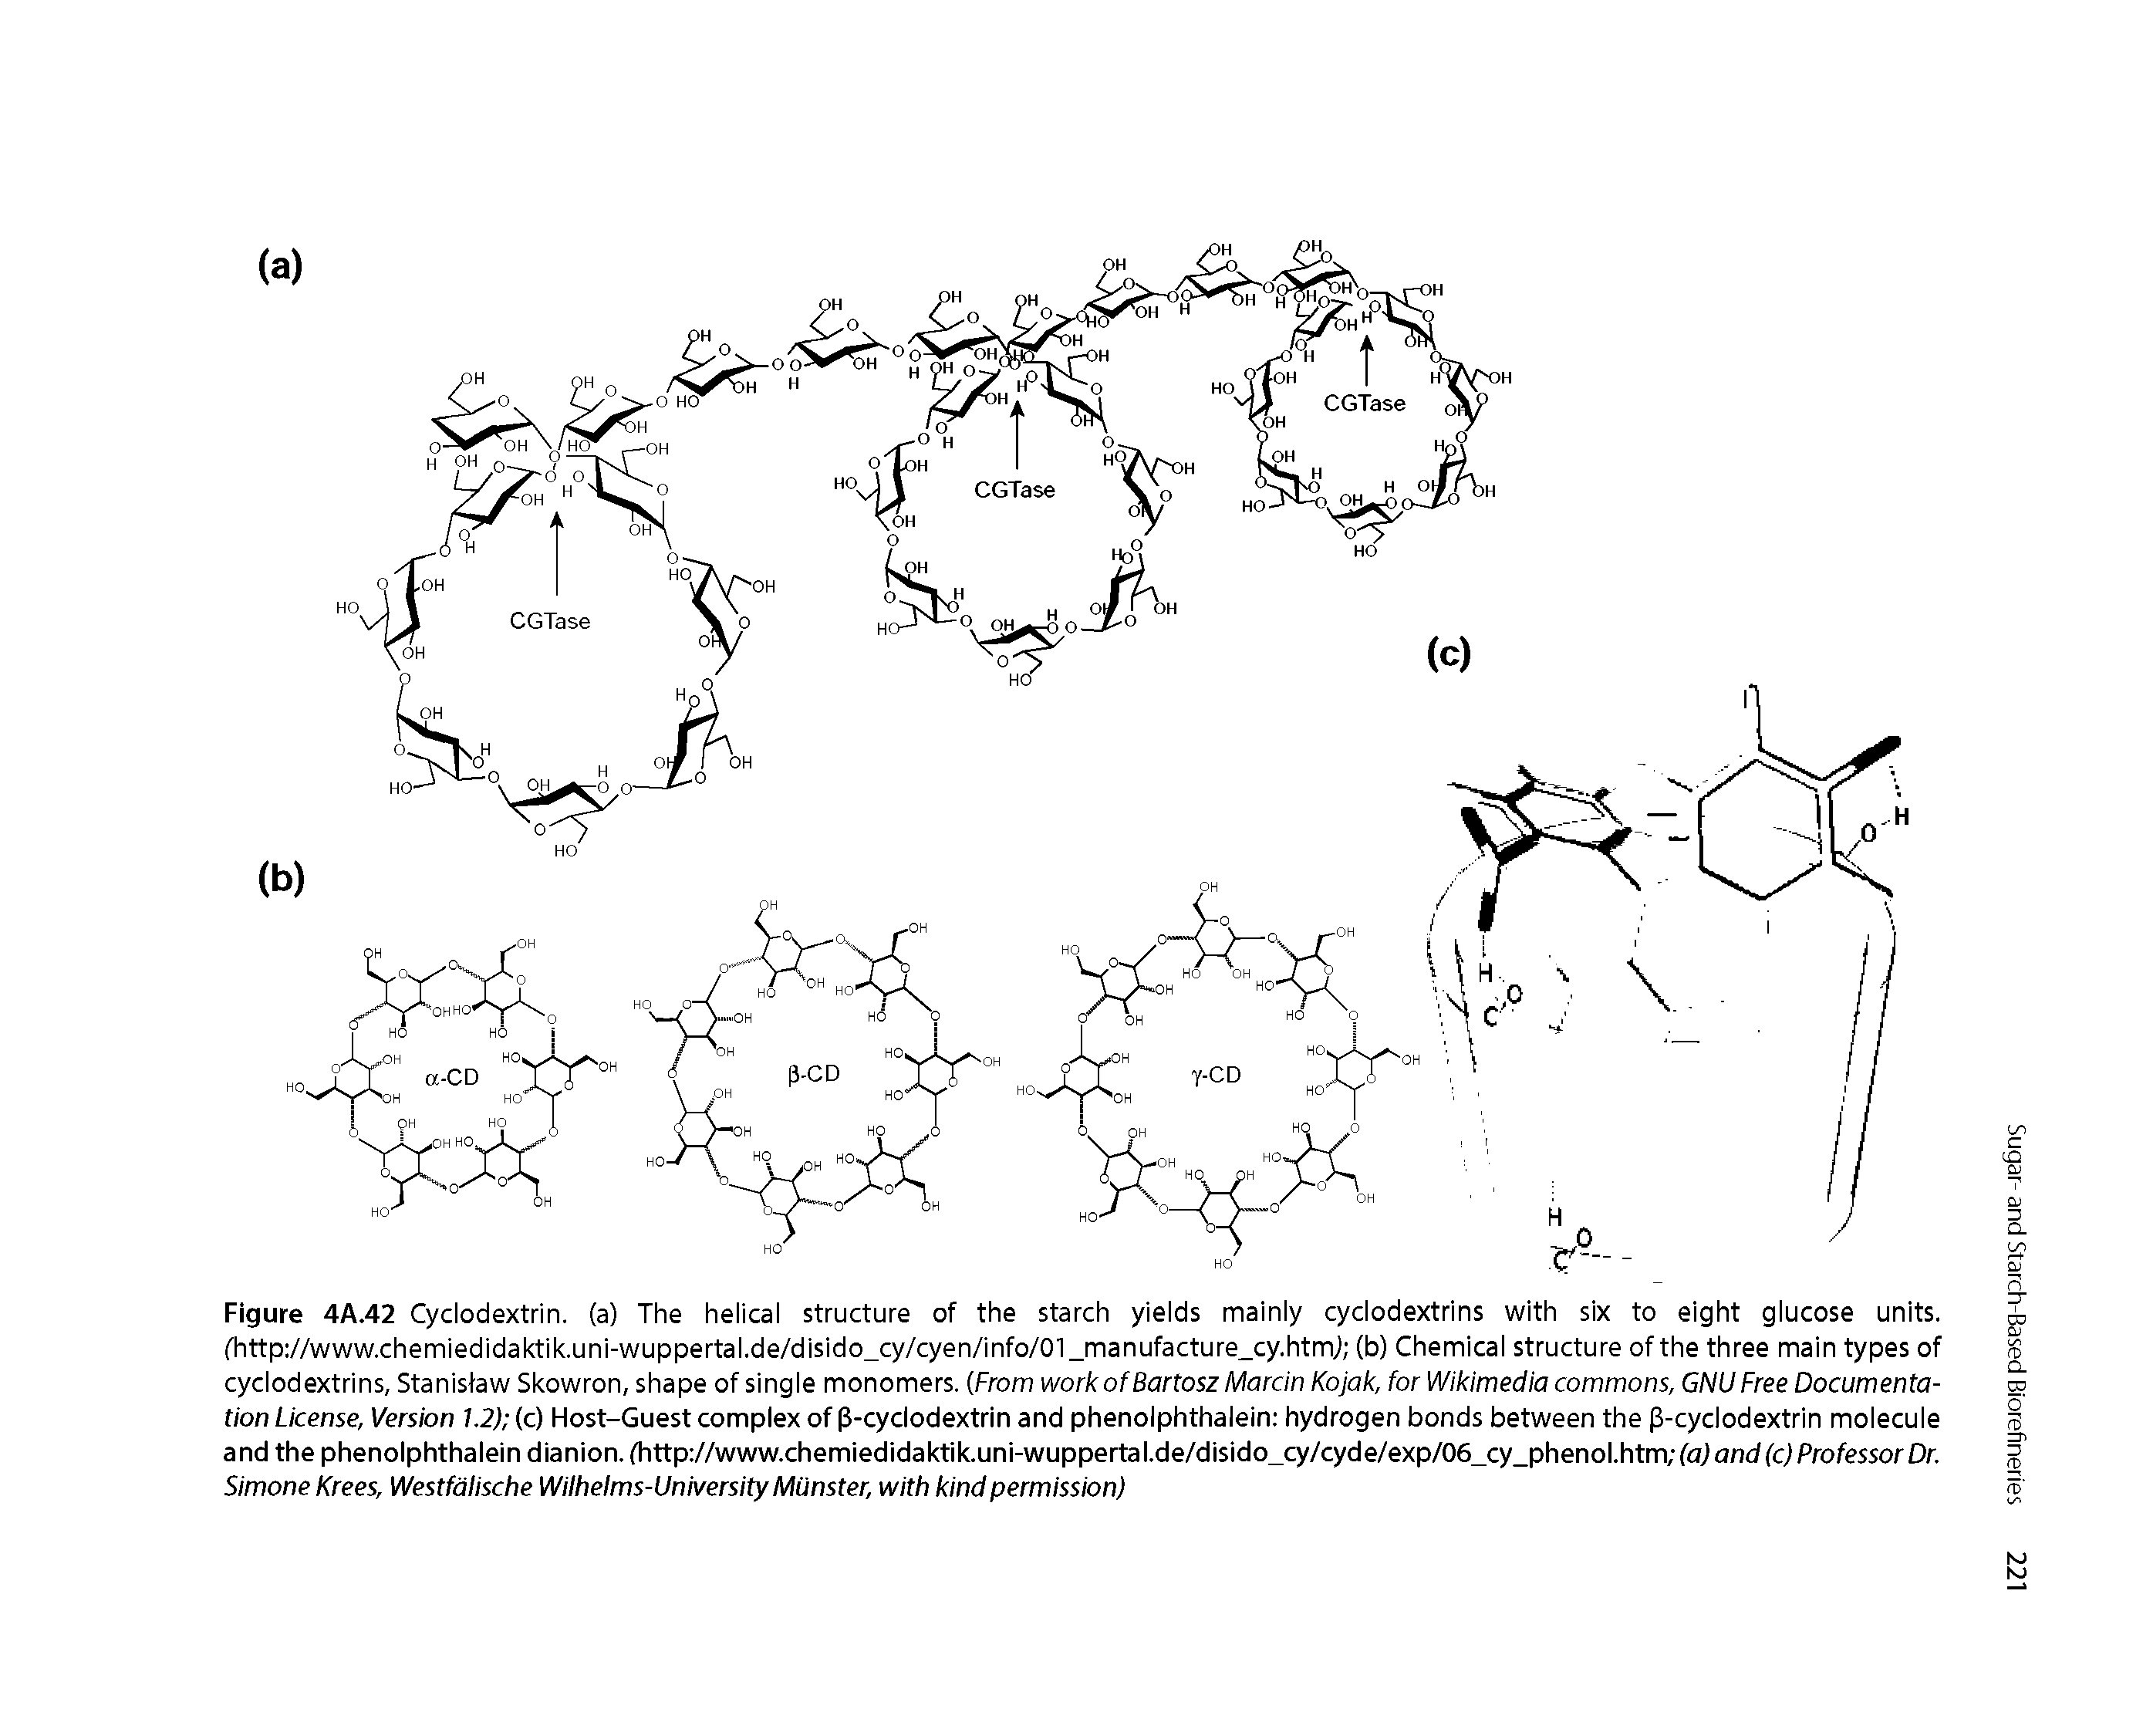 Figure 4A.42 Cyclodextrin, (a) The helical structure of the starch yields mainly cyclodextrins with six to eight glucose units. fhttp //www.chemiedidaktik.uni-wuppertal.de/disido cy/cyen/info/01 manufacture cy.htmj (b) Chemical structure of the three main types of cyclodextrins, Stanisfaw Skowron, shape of single monomers. From work of Bartosz Marcin Kojak, for Wikimedia commons, GNU Free Documentation License, Version 1.2) c) Host-Guest complex of 3-cyclodextrin and phenolphthalein hydrogen bonds between the p-cyclodextrin molecule and the phenolphthalein dianion. fhttp //www.chemiedidaktik.uni-wuppertal.de/disido cy/cyde/exp/06 cy phenol.htm (aj 7ndfc,)ProfessorDr. Simone Krees, Westfdlische Wiihelms-University Munster, with kind permission)...